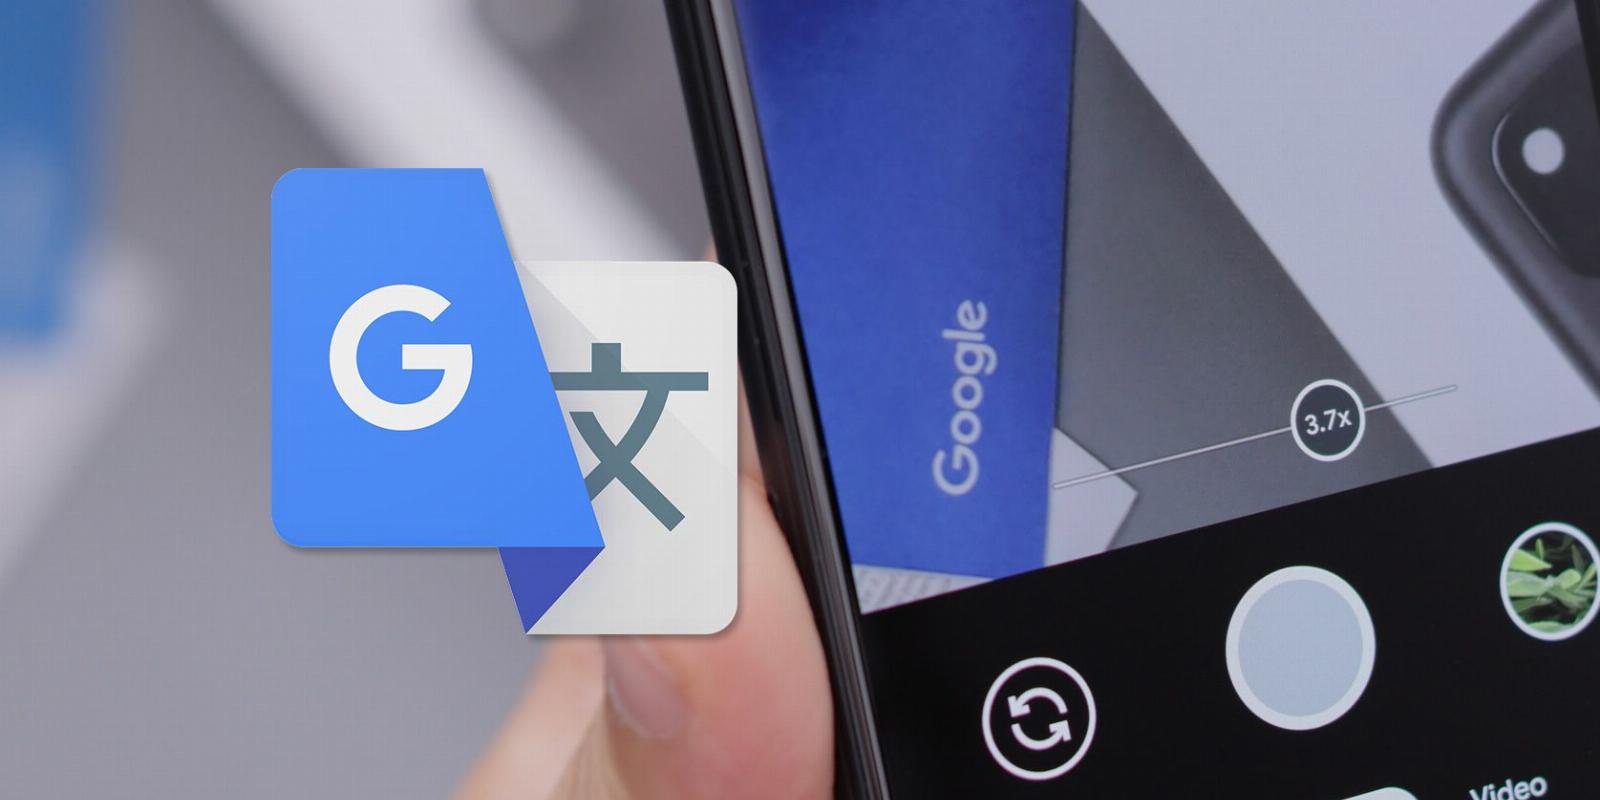 ChatGPT vs. Google Translate: Which Is Better At Translation?